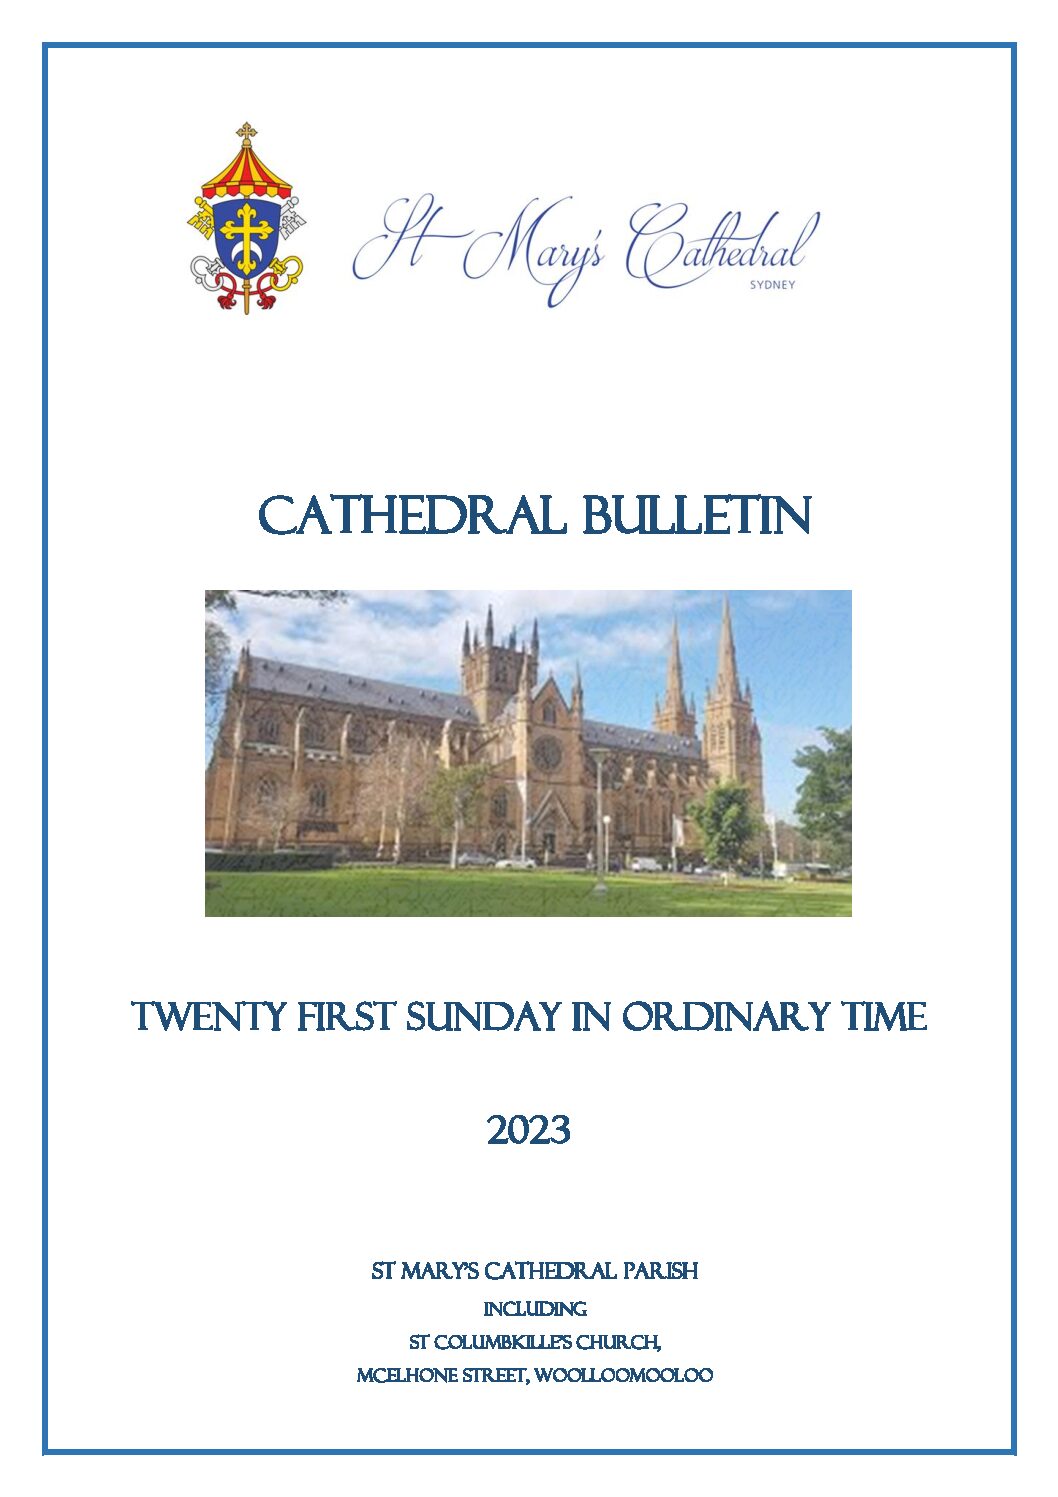 CATHEDRAL BULLETIN 26 August 2023 Pdf 